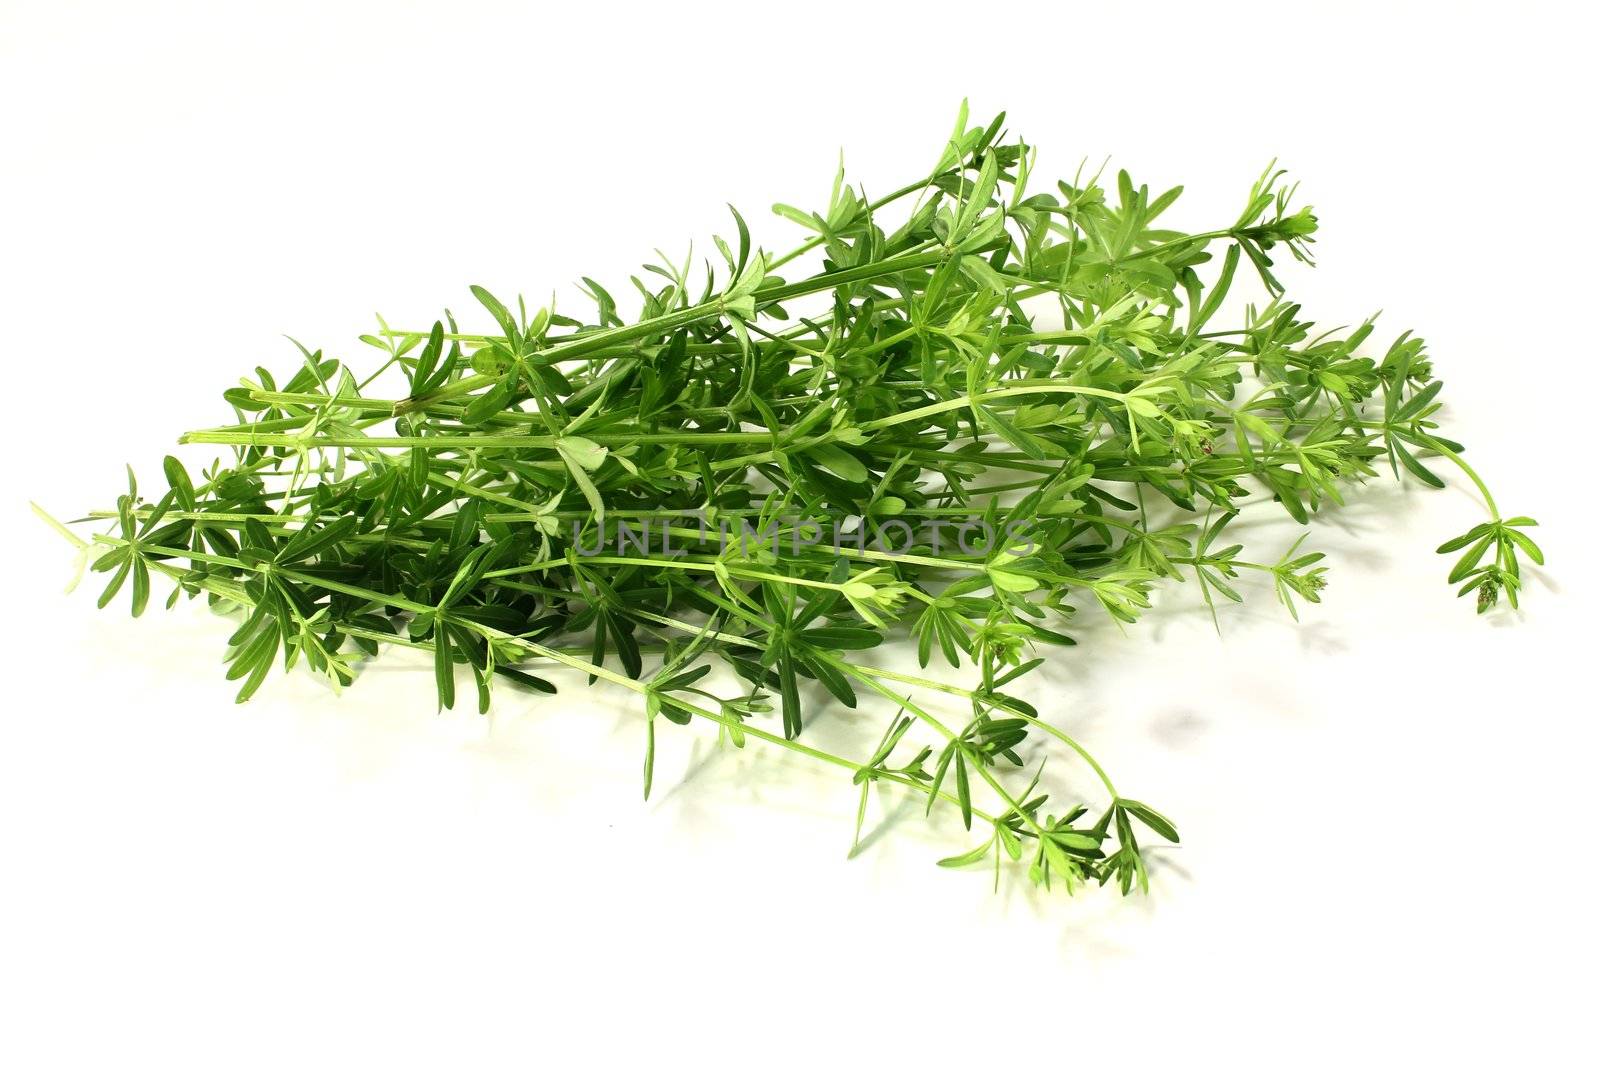 some bedstraw stems on a light background